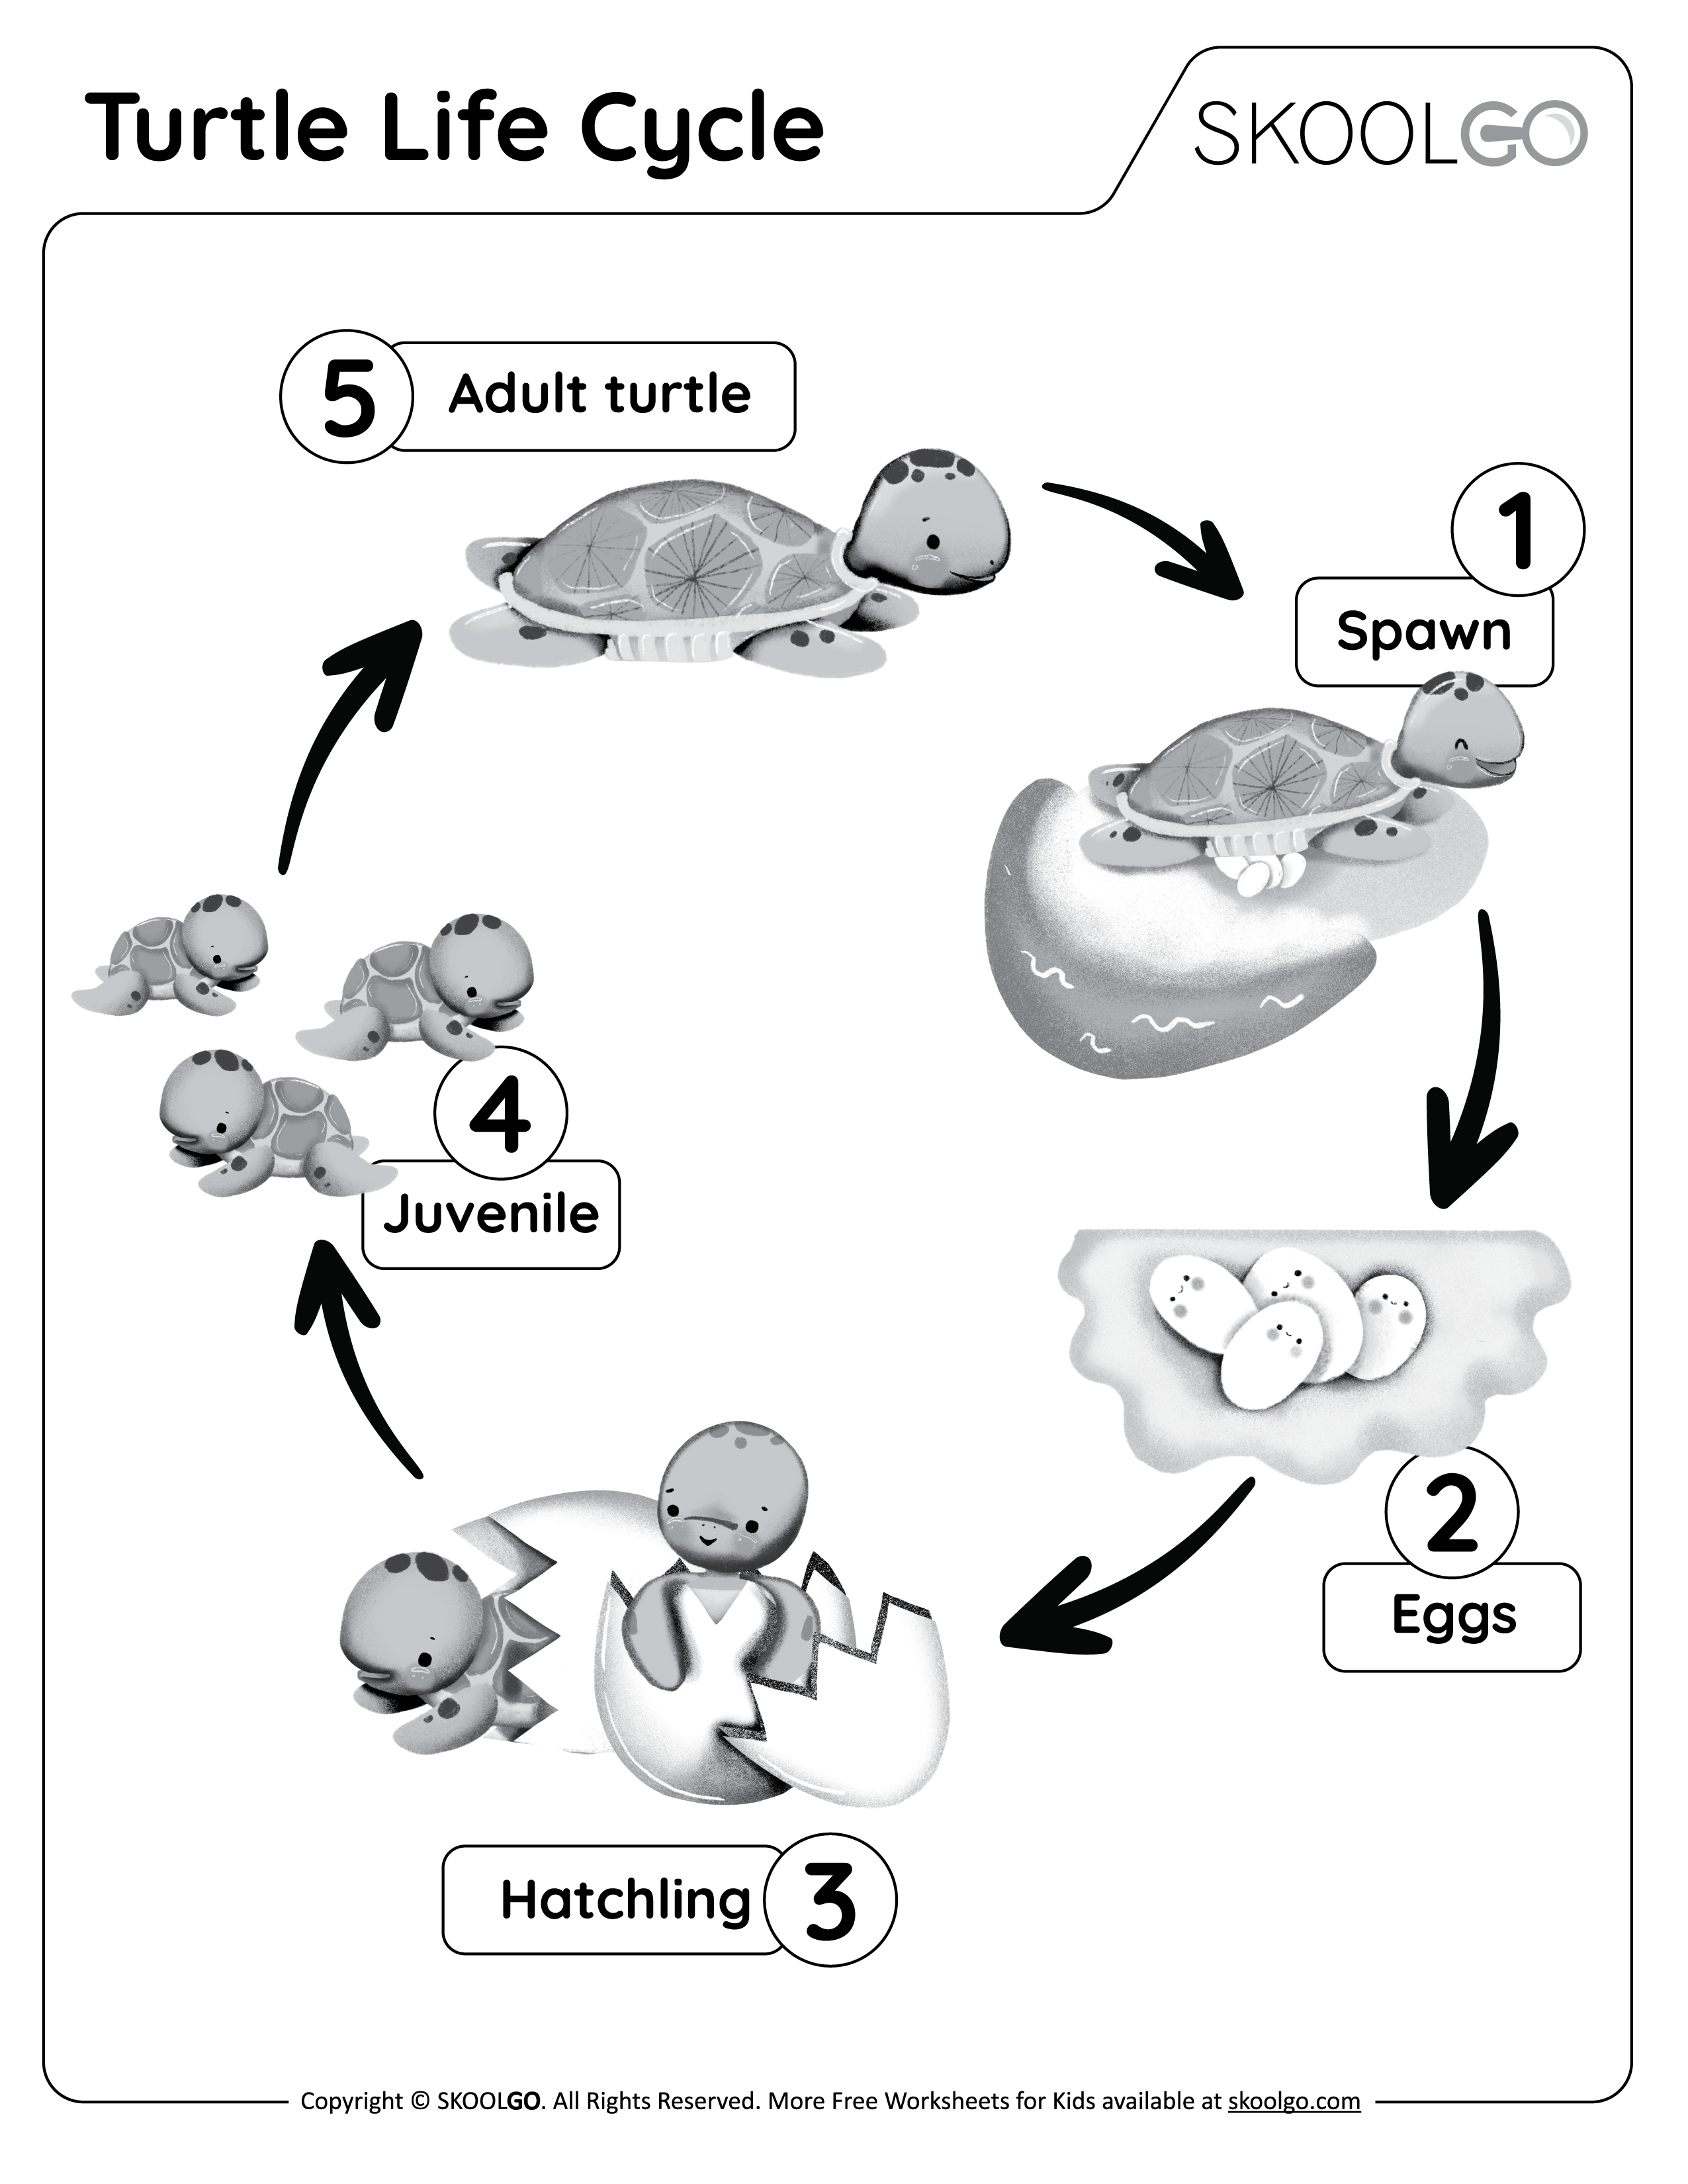 Turtle Life Cycle - Free Black and White Worksheet for Kids